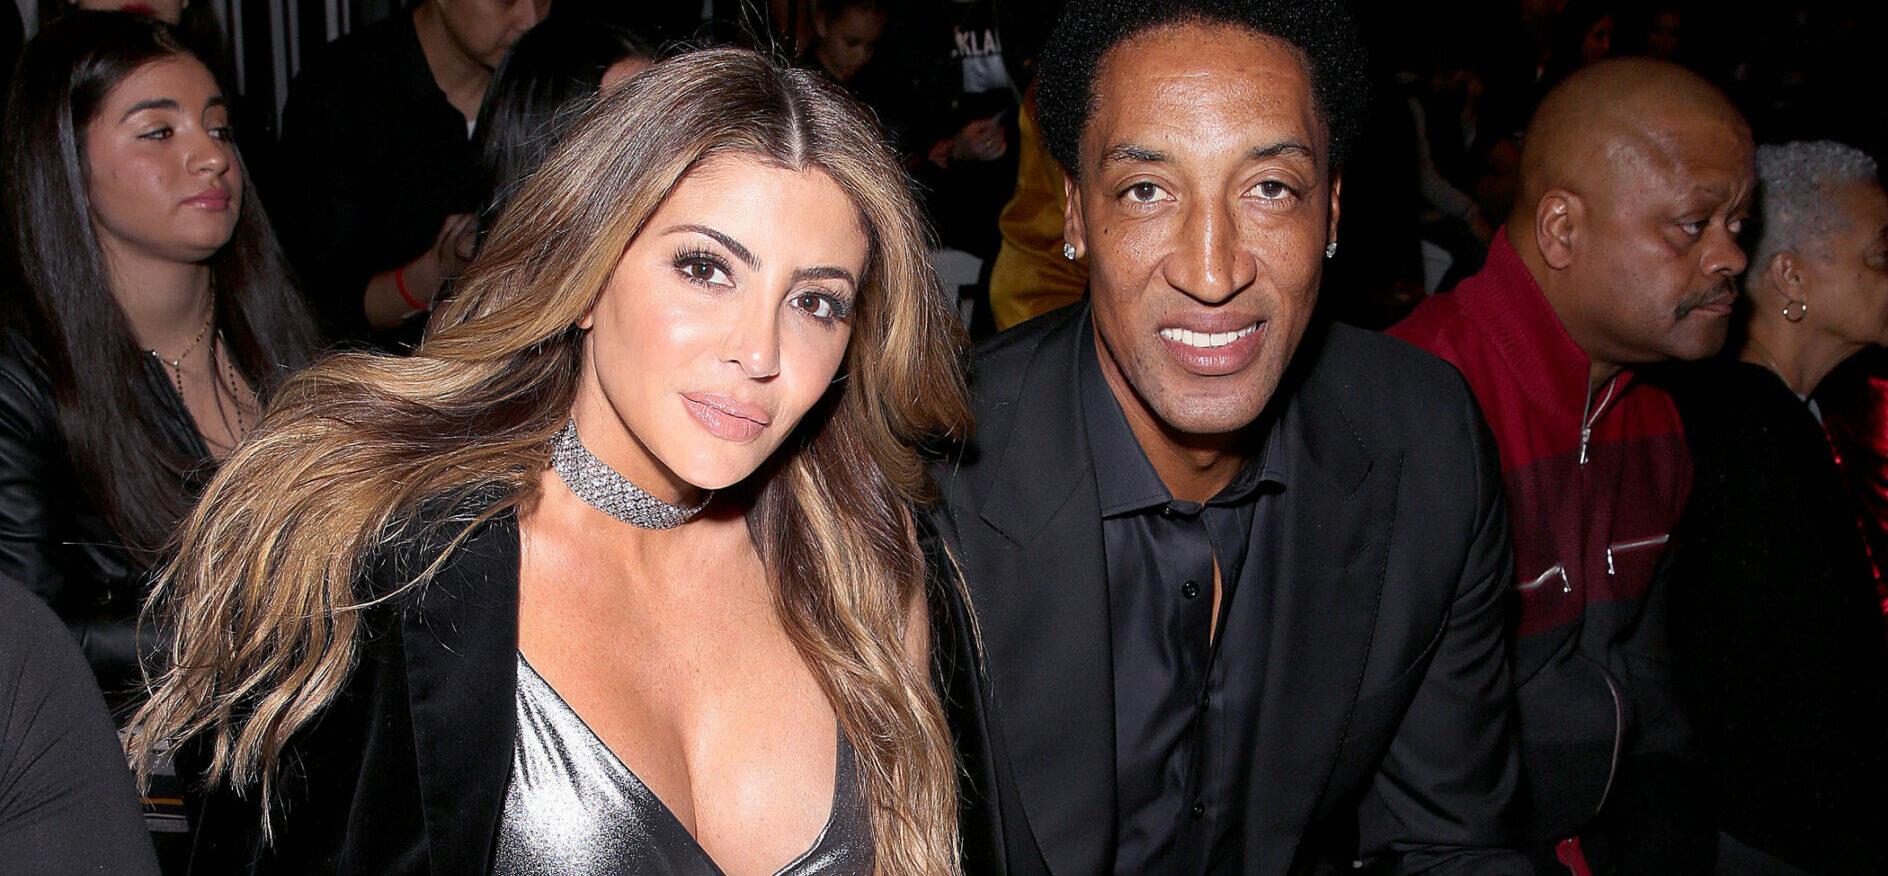 Larsa Pippen Settles Divorce With Ex-Husband Scottie, 3 Years After Filing